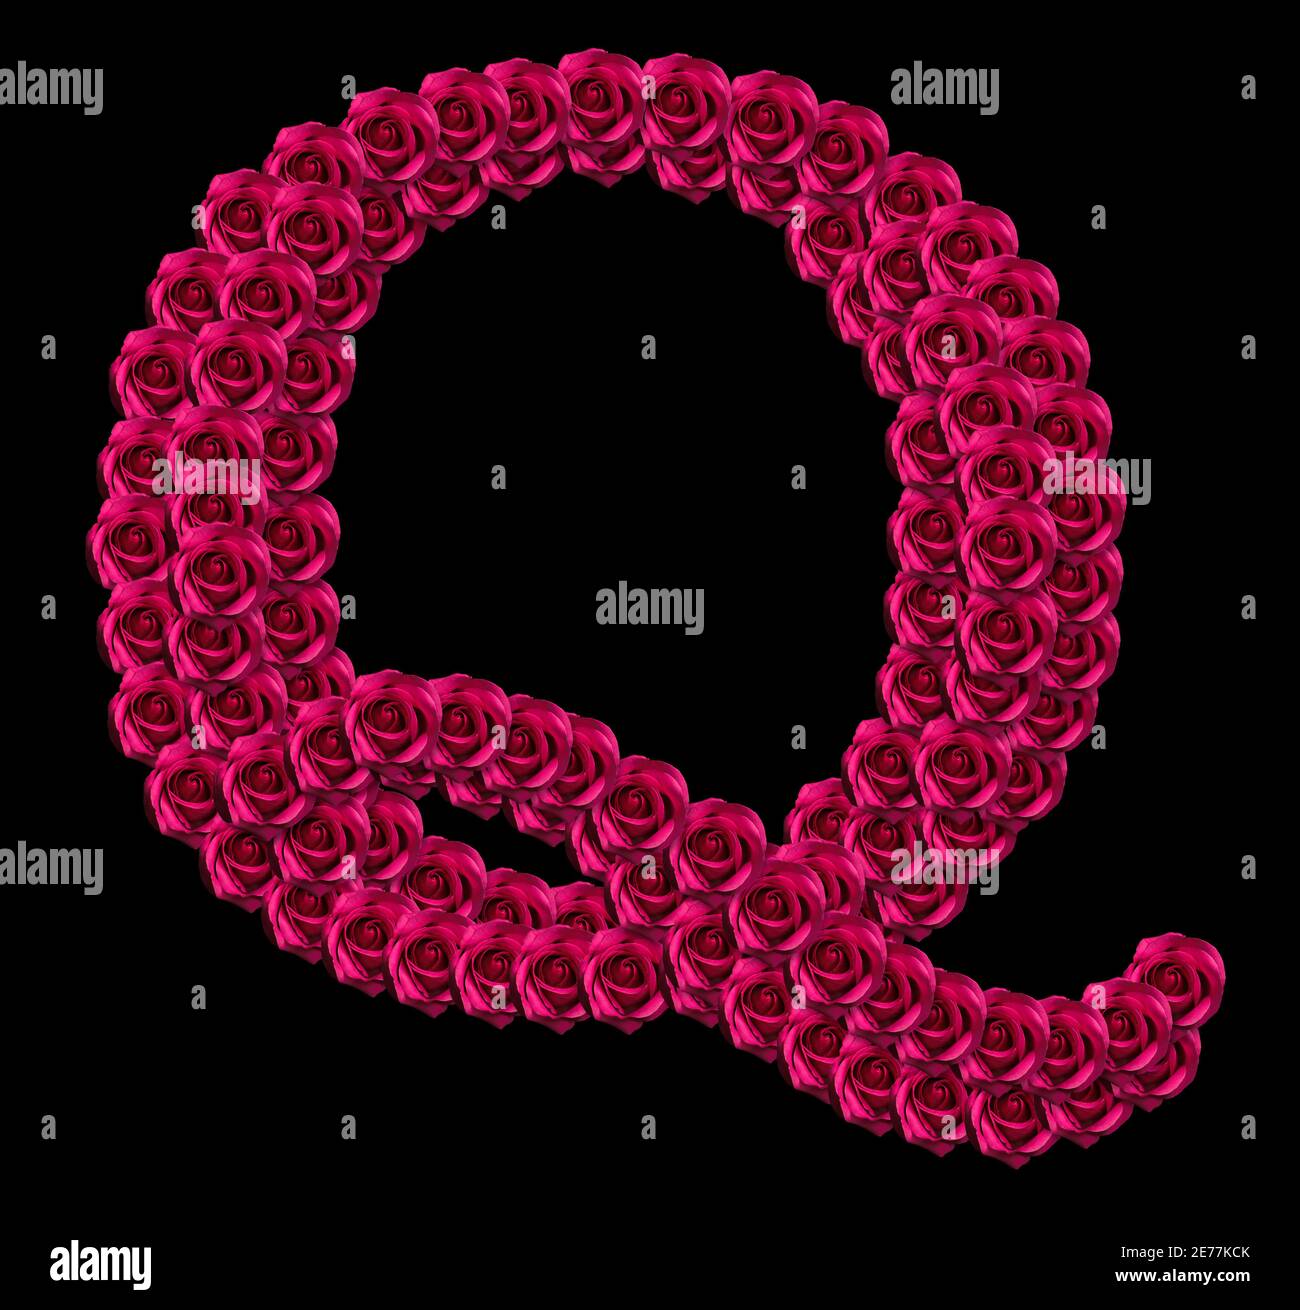 romantic concept image of a capital letter Q made of red roses. Isolated on black background. Design element for love or valentines themes Stock Photo